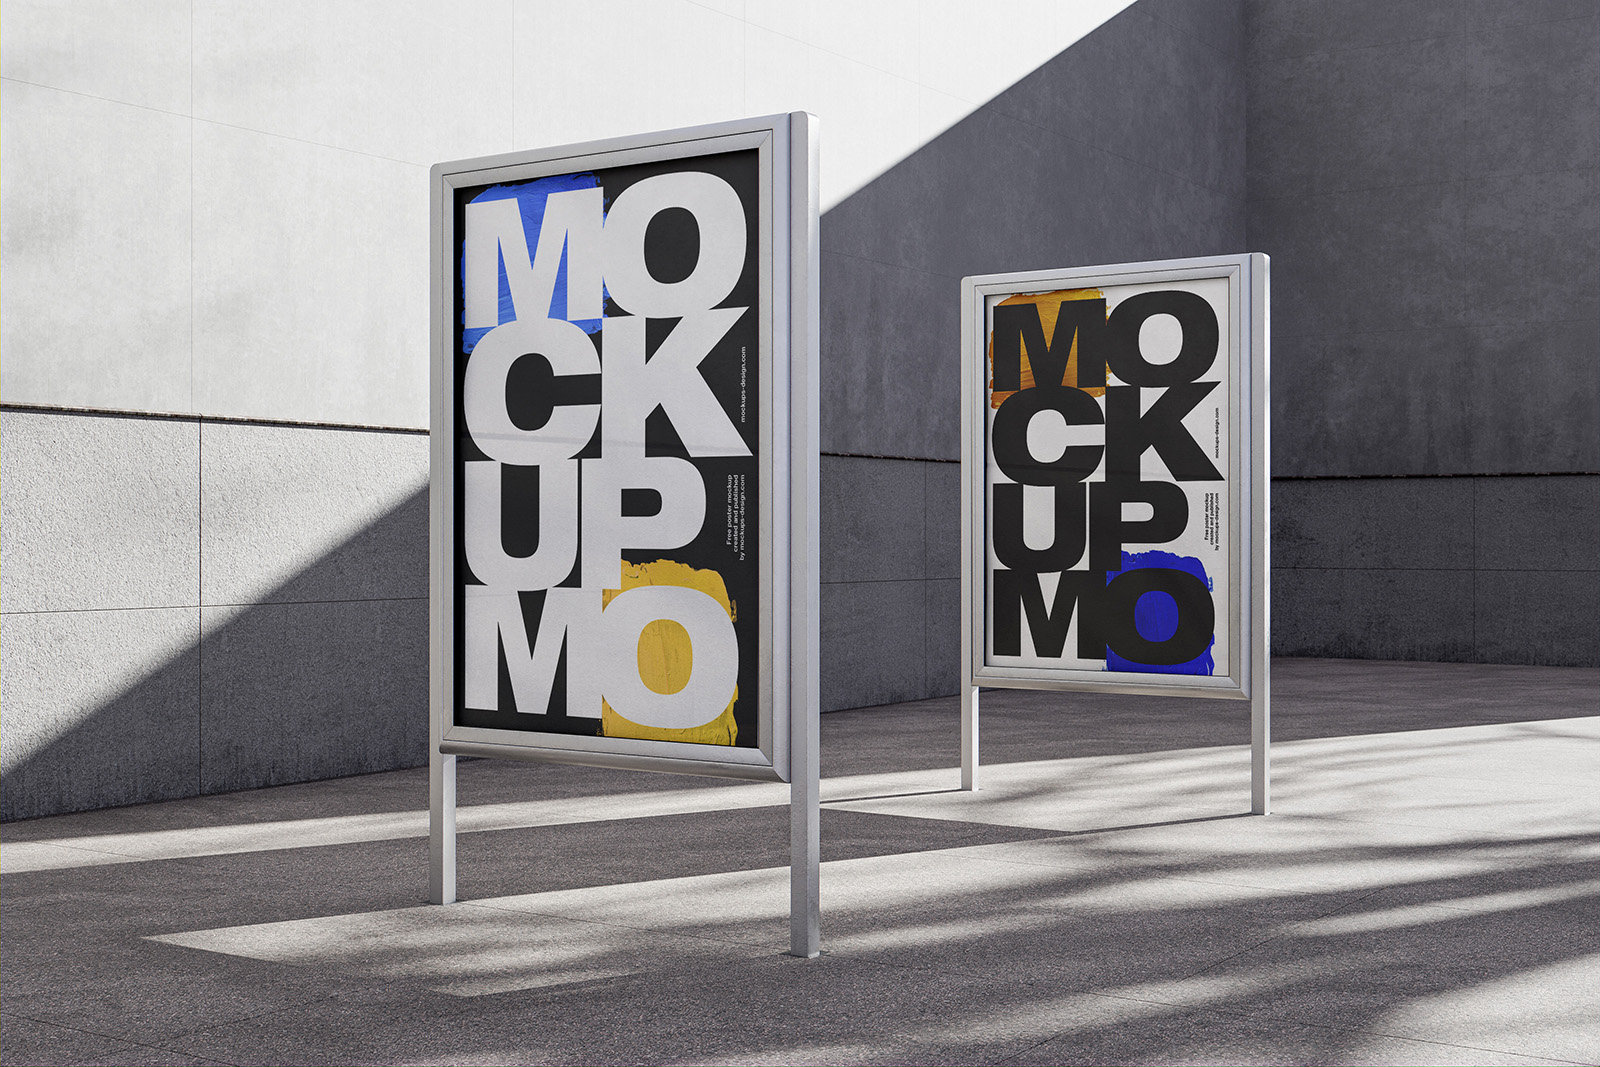 4 Exhibition Citylight Mockups in Perspective Views FREE PSD